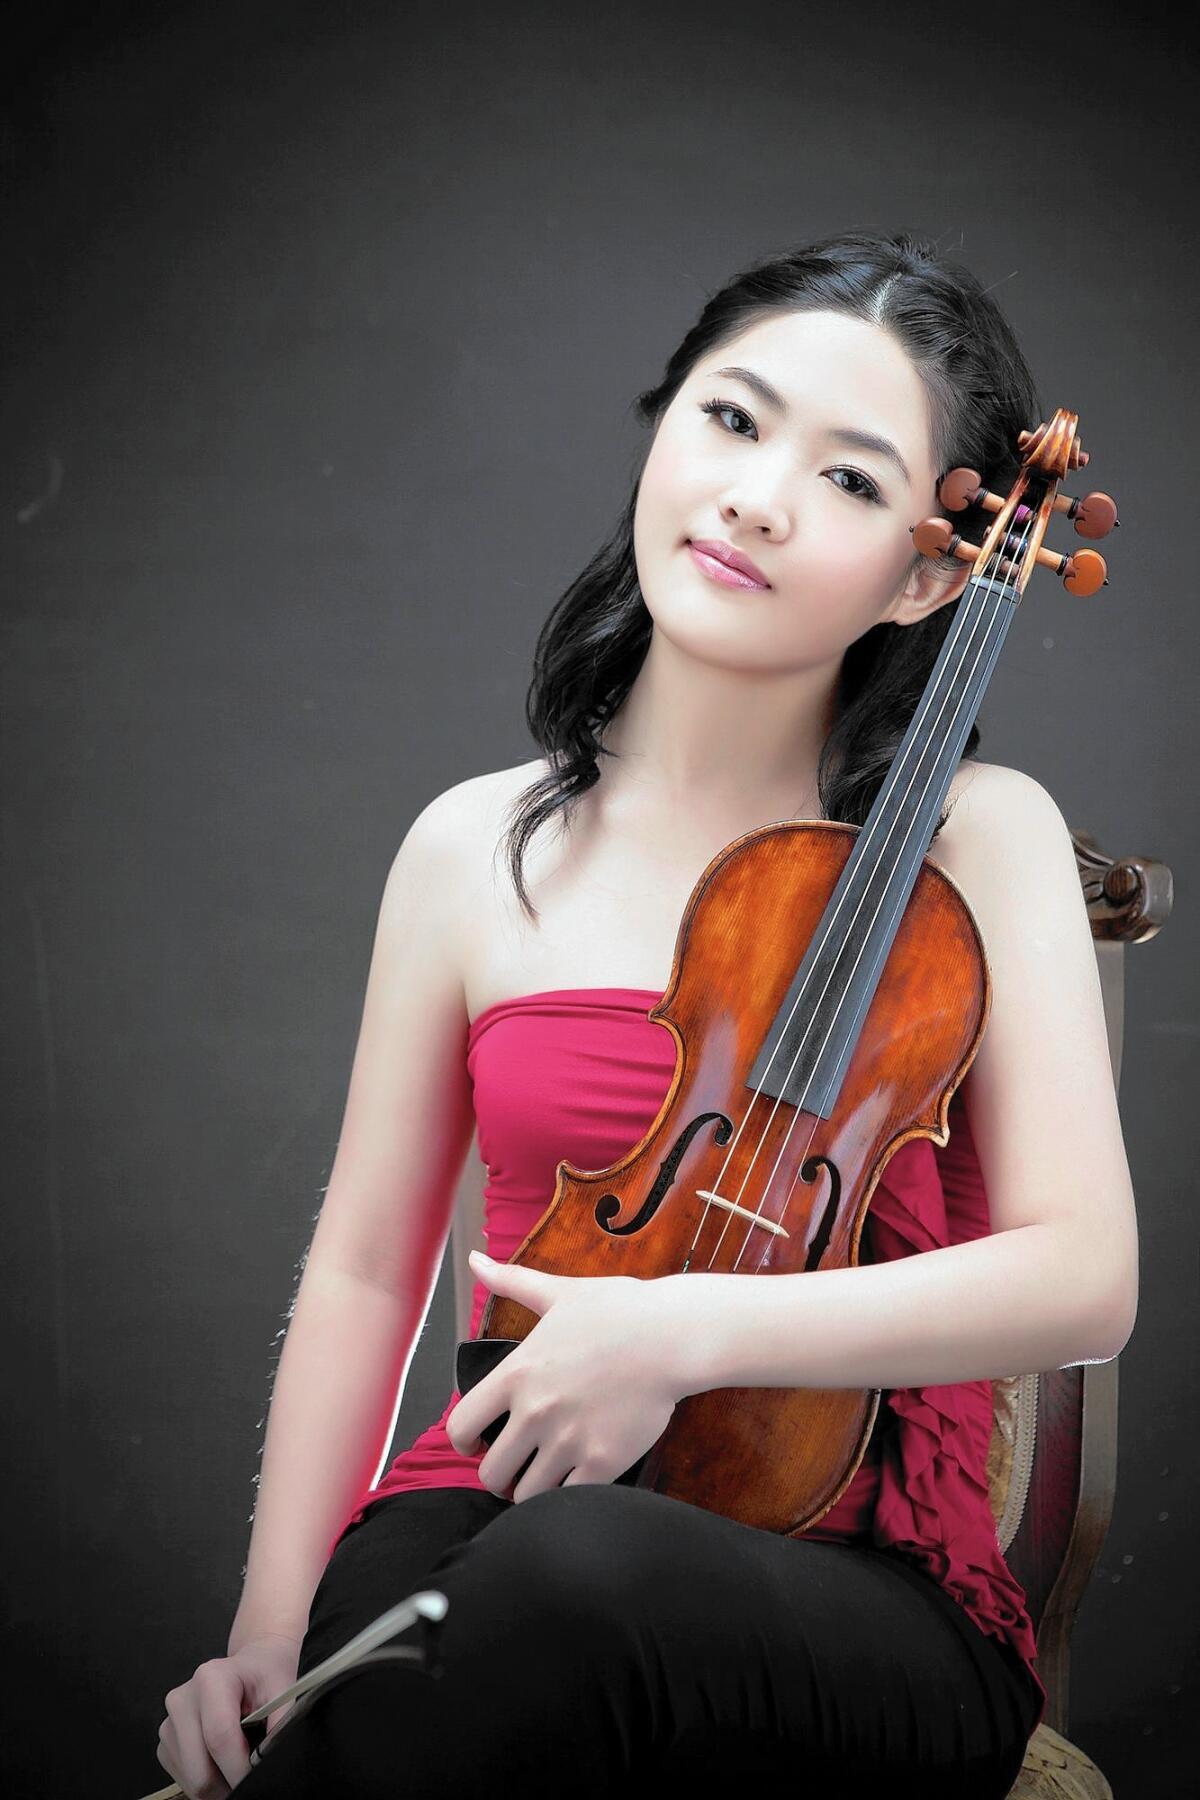 Chloe Chiu recently joined the Pacific Symphony's second violin section. Chiu, born in Taiwan, also plays with the Santa Barbara Symphony and is studying at USC for her graduate program certificate.